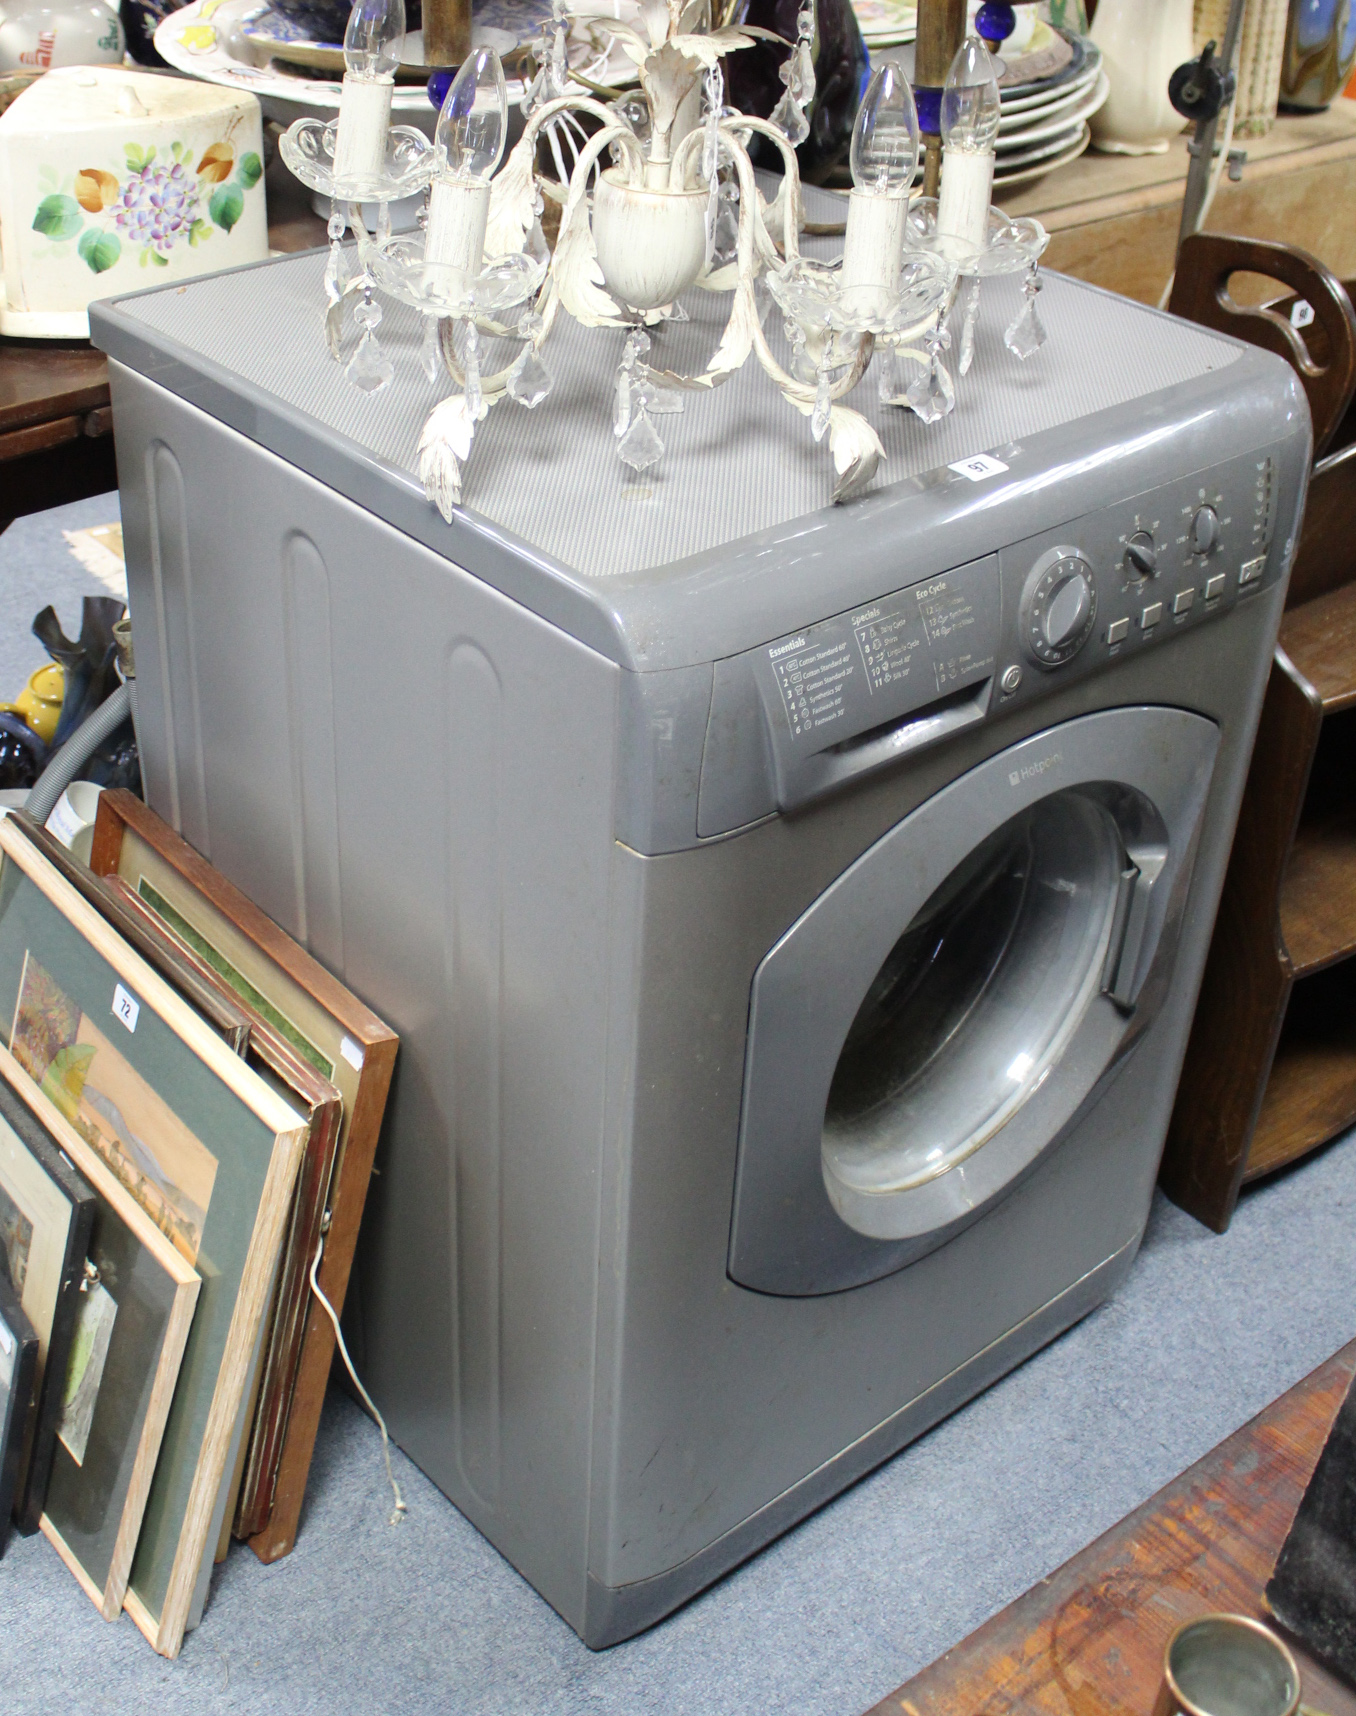 A Hotpoint 8kg washing machine in silvered-finish case.